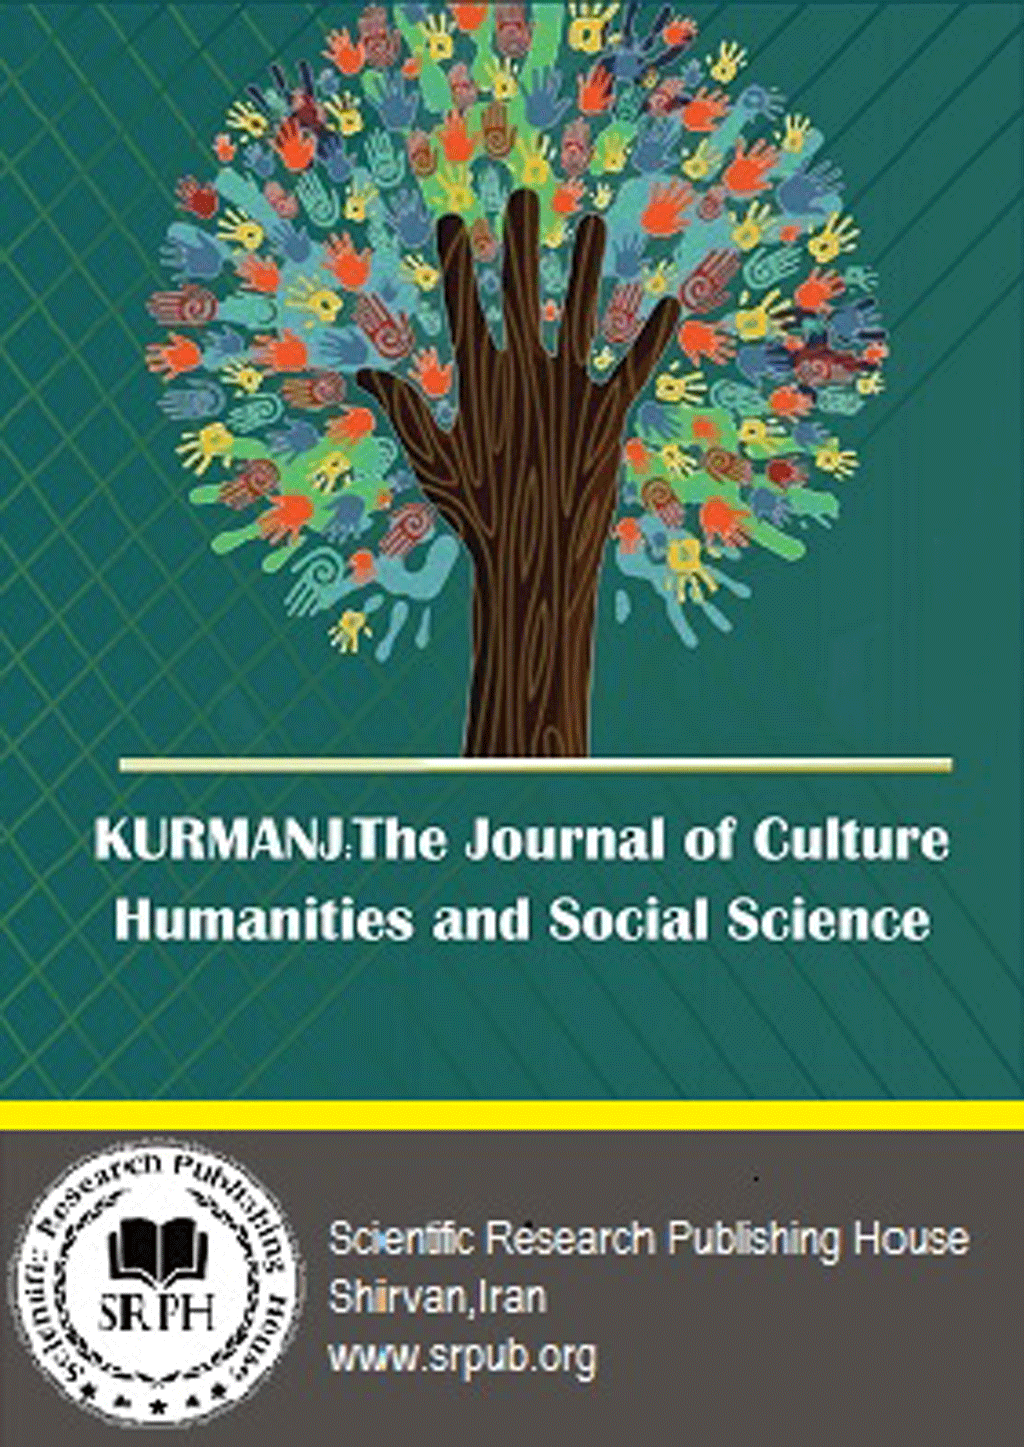 Culture, Humanities and Social Science - Winter 2020, Volume 2 - Number 1